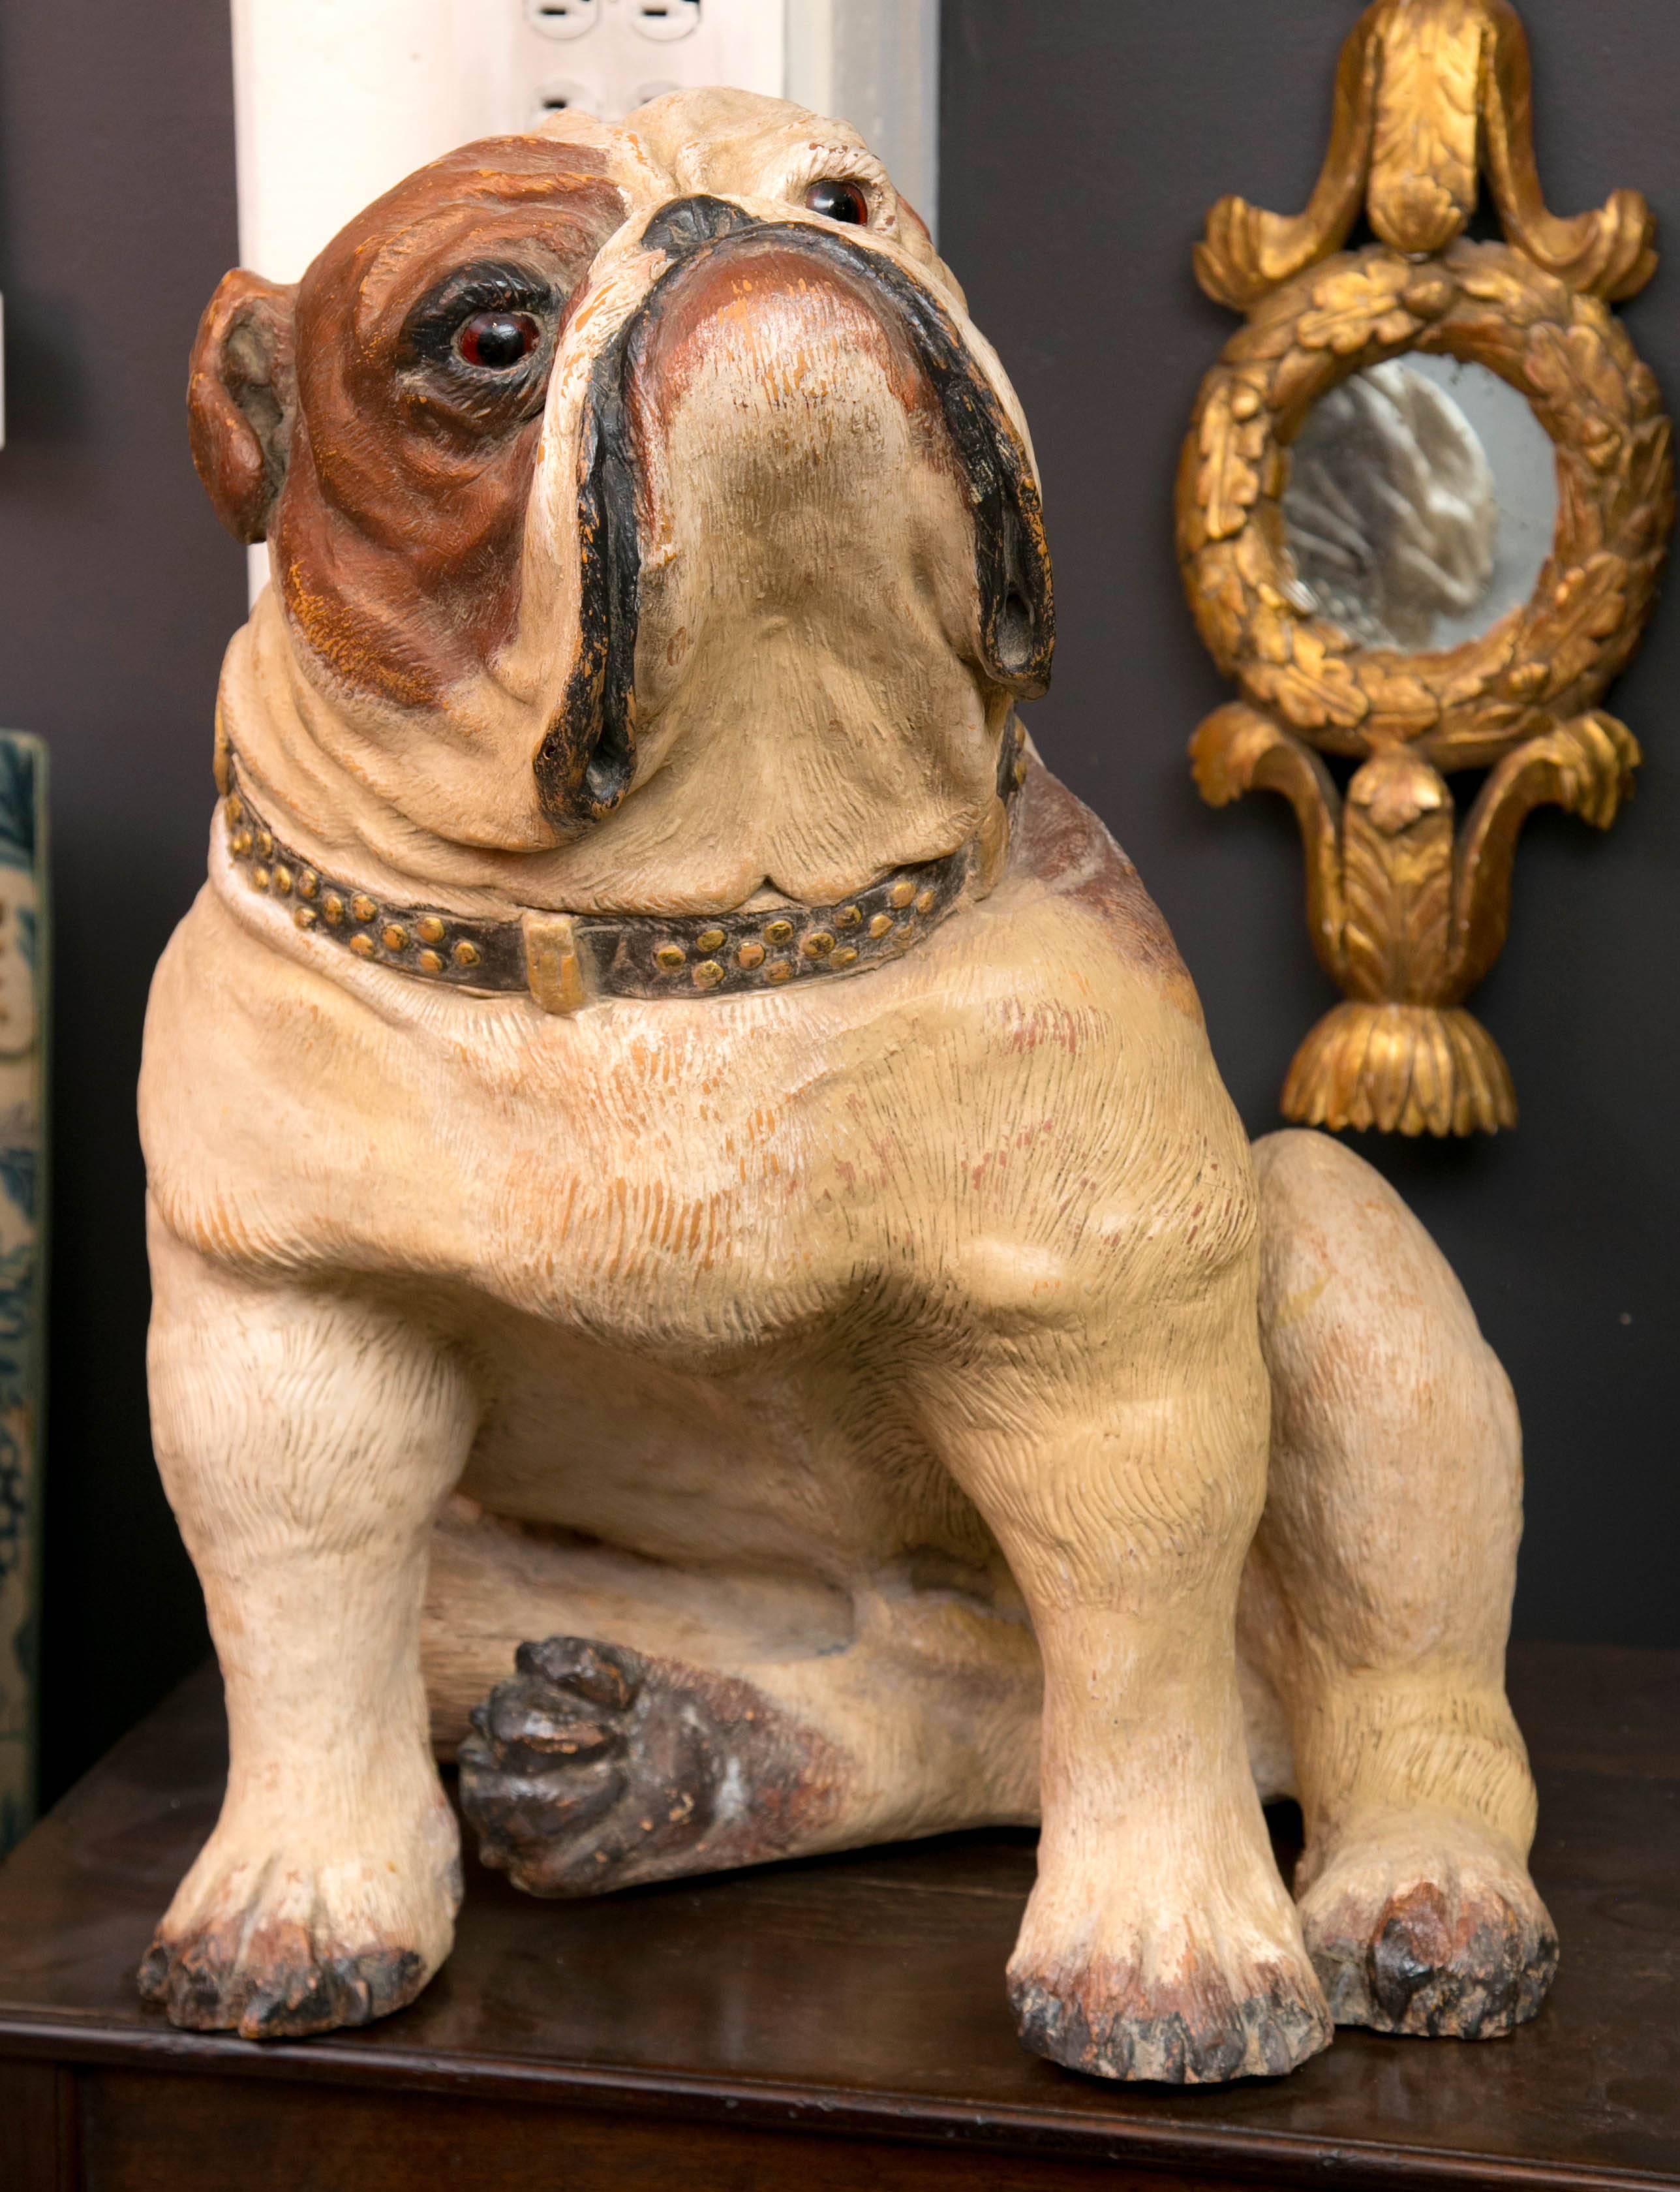 Rare hand-painted realistic terra cotta English bulldog with glass eyes and collar in sitting position.